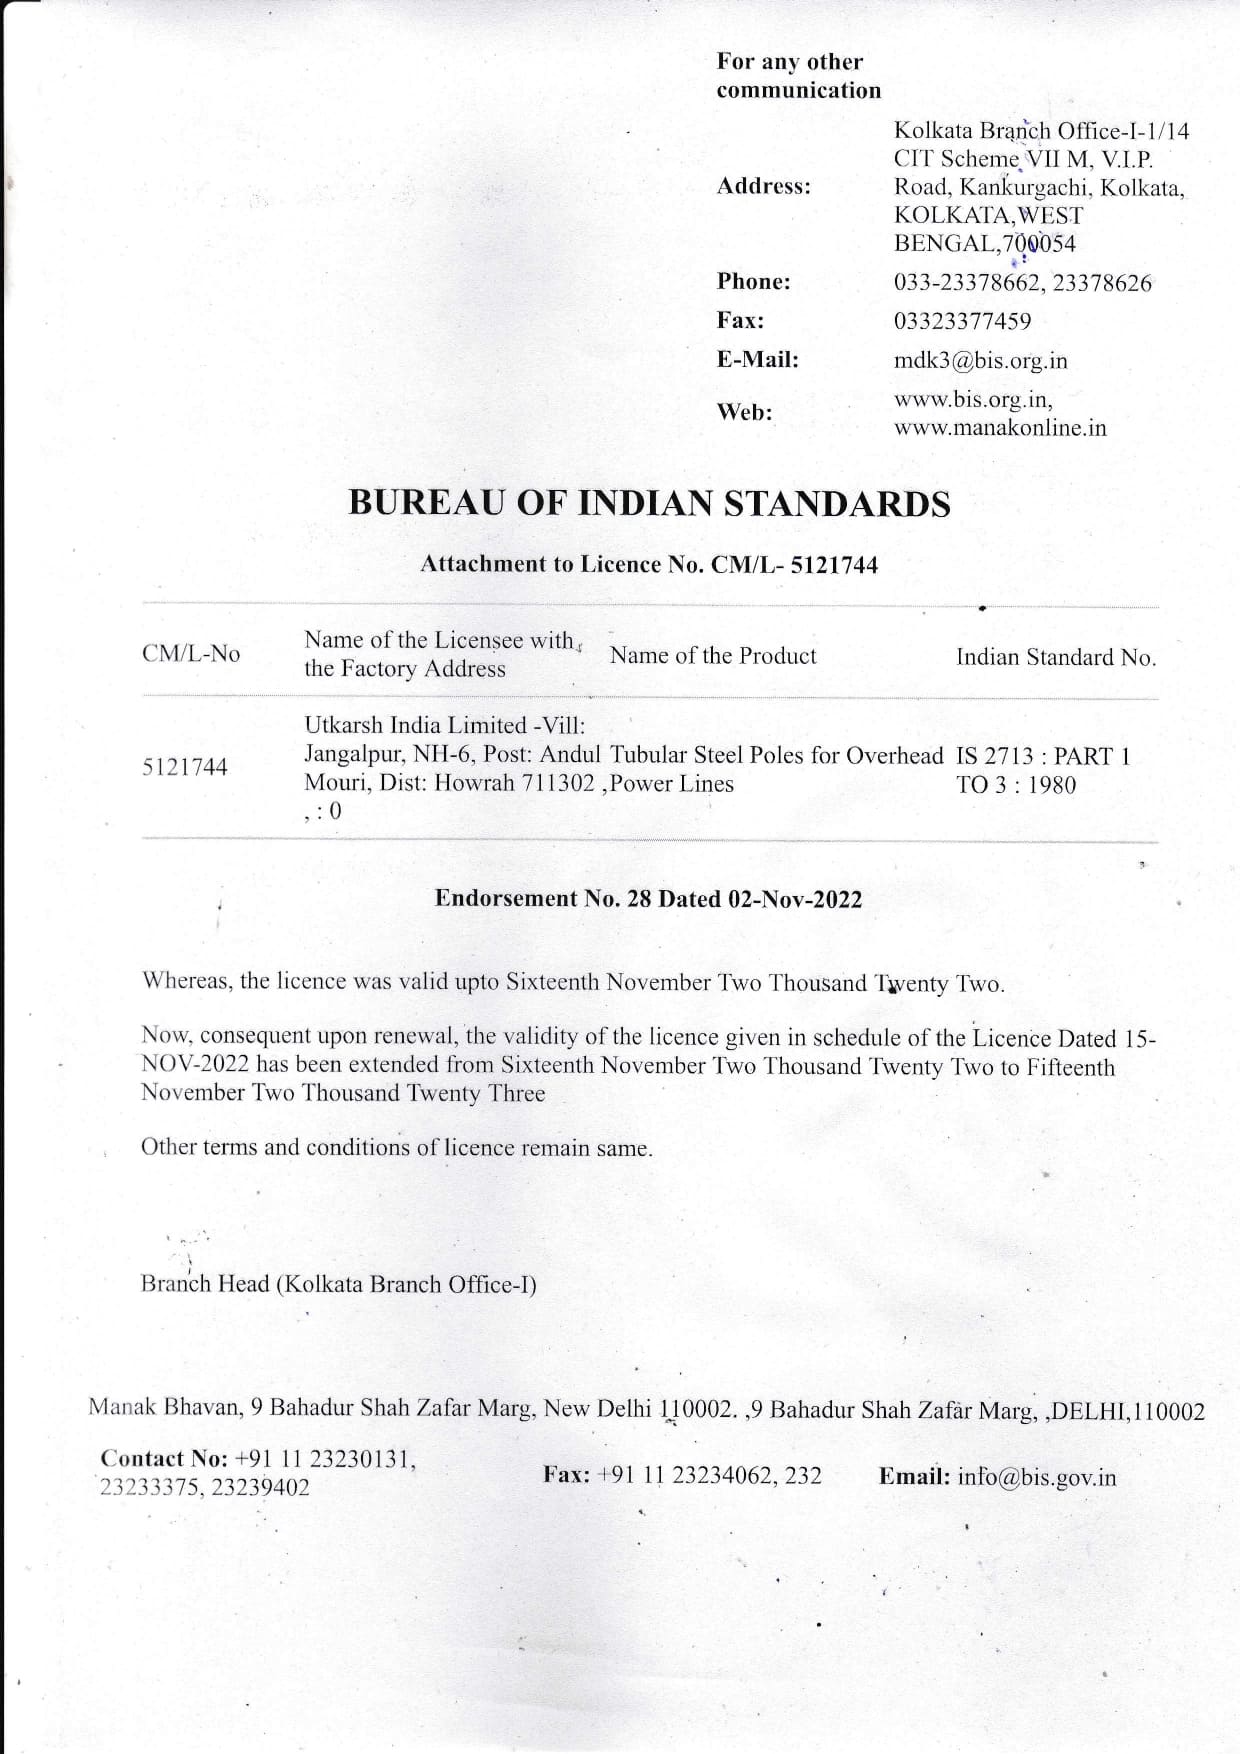 Bureau of Indian Standards IS 2713 PART 1 TO 3  1980